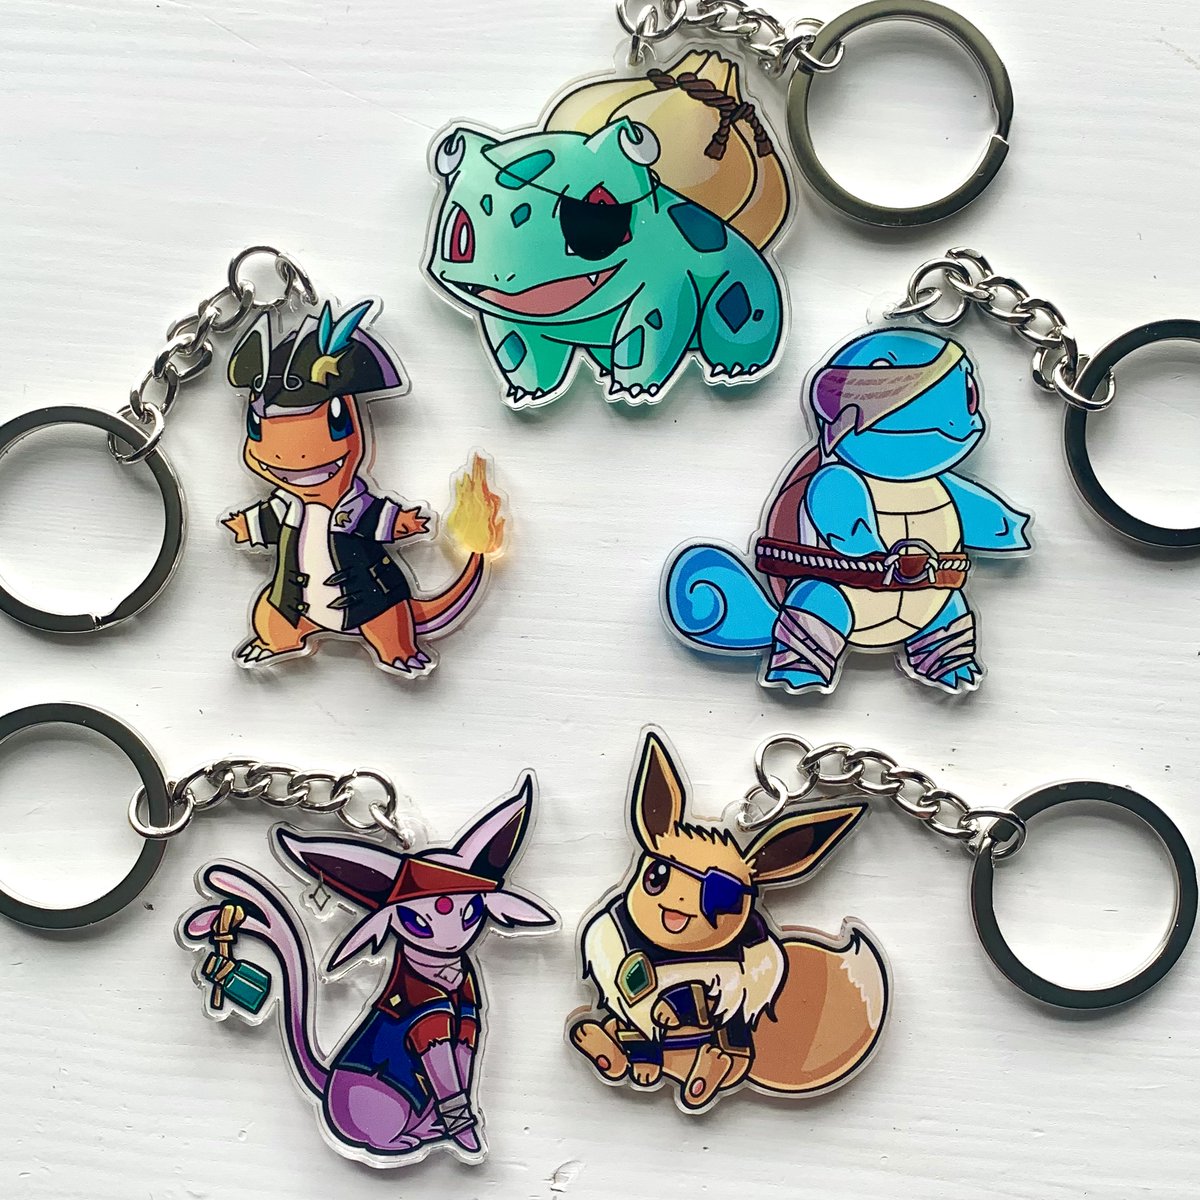 OH EM GEE!! They're here!! ☠️ Set sail with my BRAND NEW Pirate Pokemon acrylic key rings! Choose from Charmander, Bulbasaur, Squirtle, Eevee, & Espeon. Imagine them in the Sea of Thieves! Limited quantities - snag yours now! ⚓️ #Pokemon #SeaOfThieves #BeMorePirate